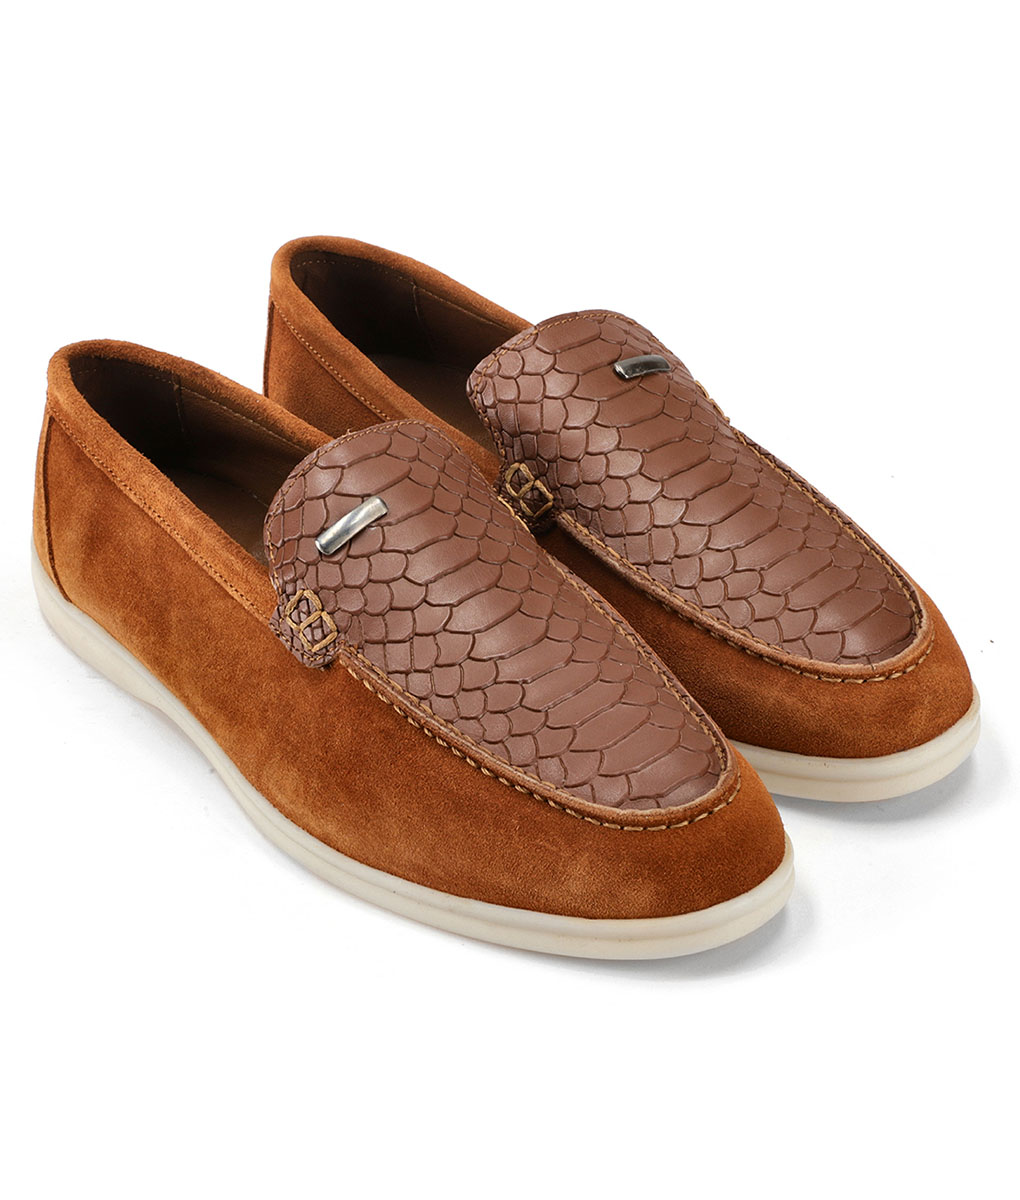 Men's Brown Crocodile Suede Leather Shoes